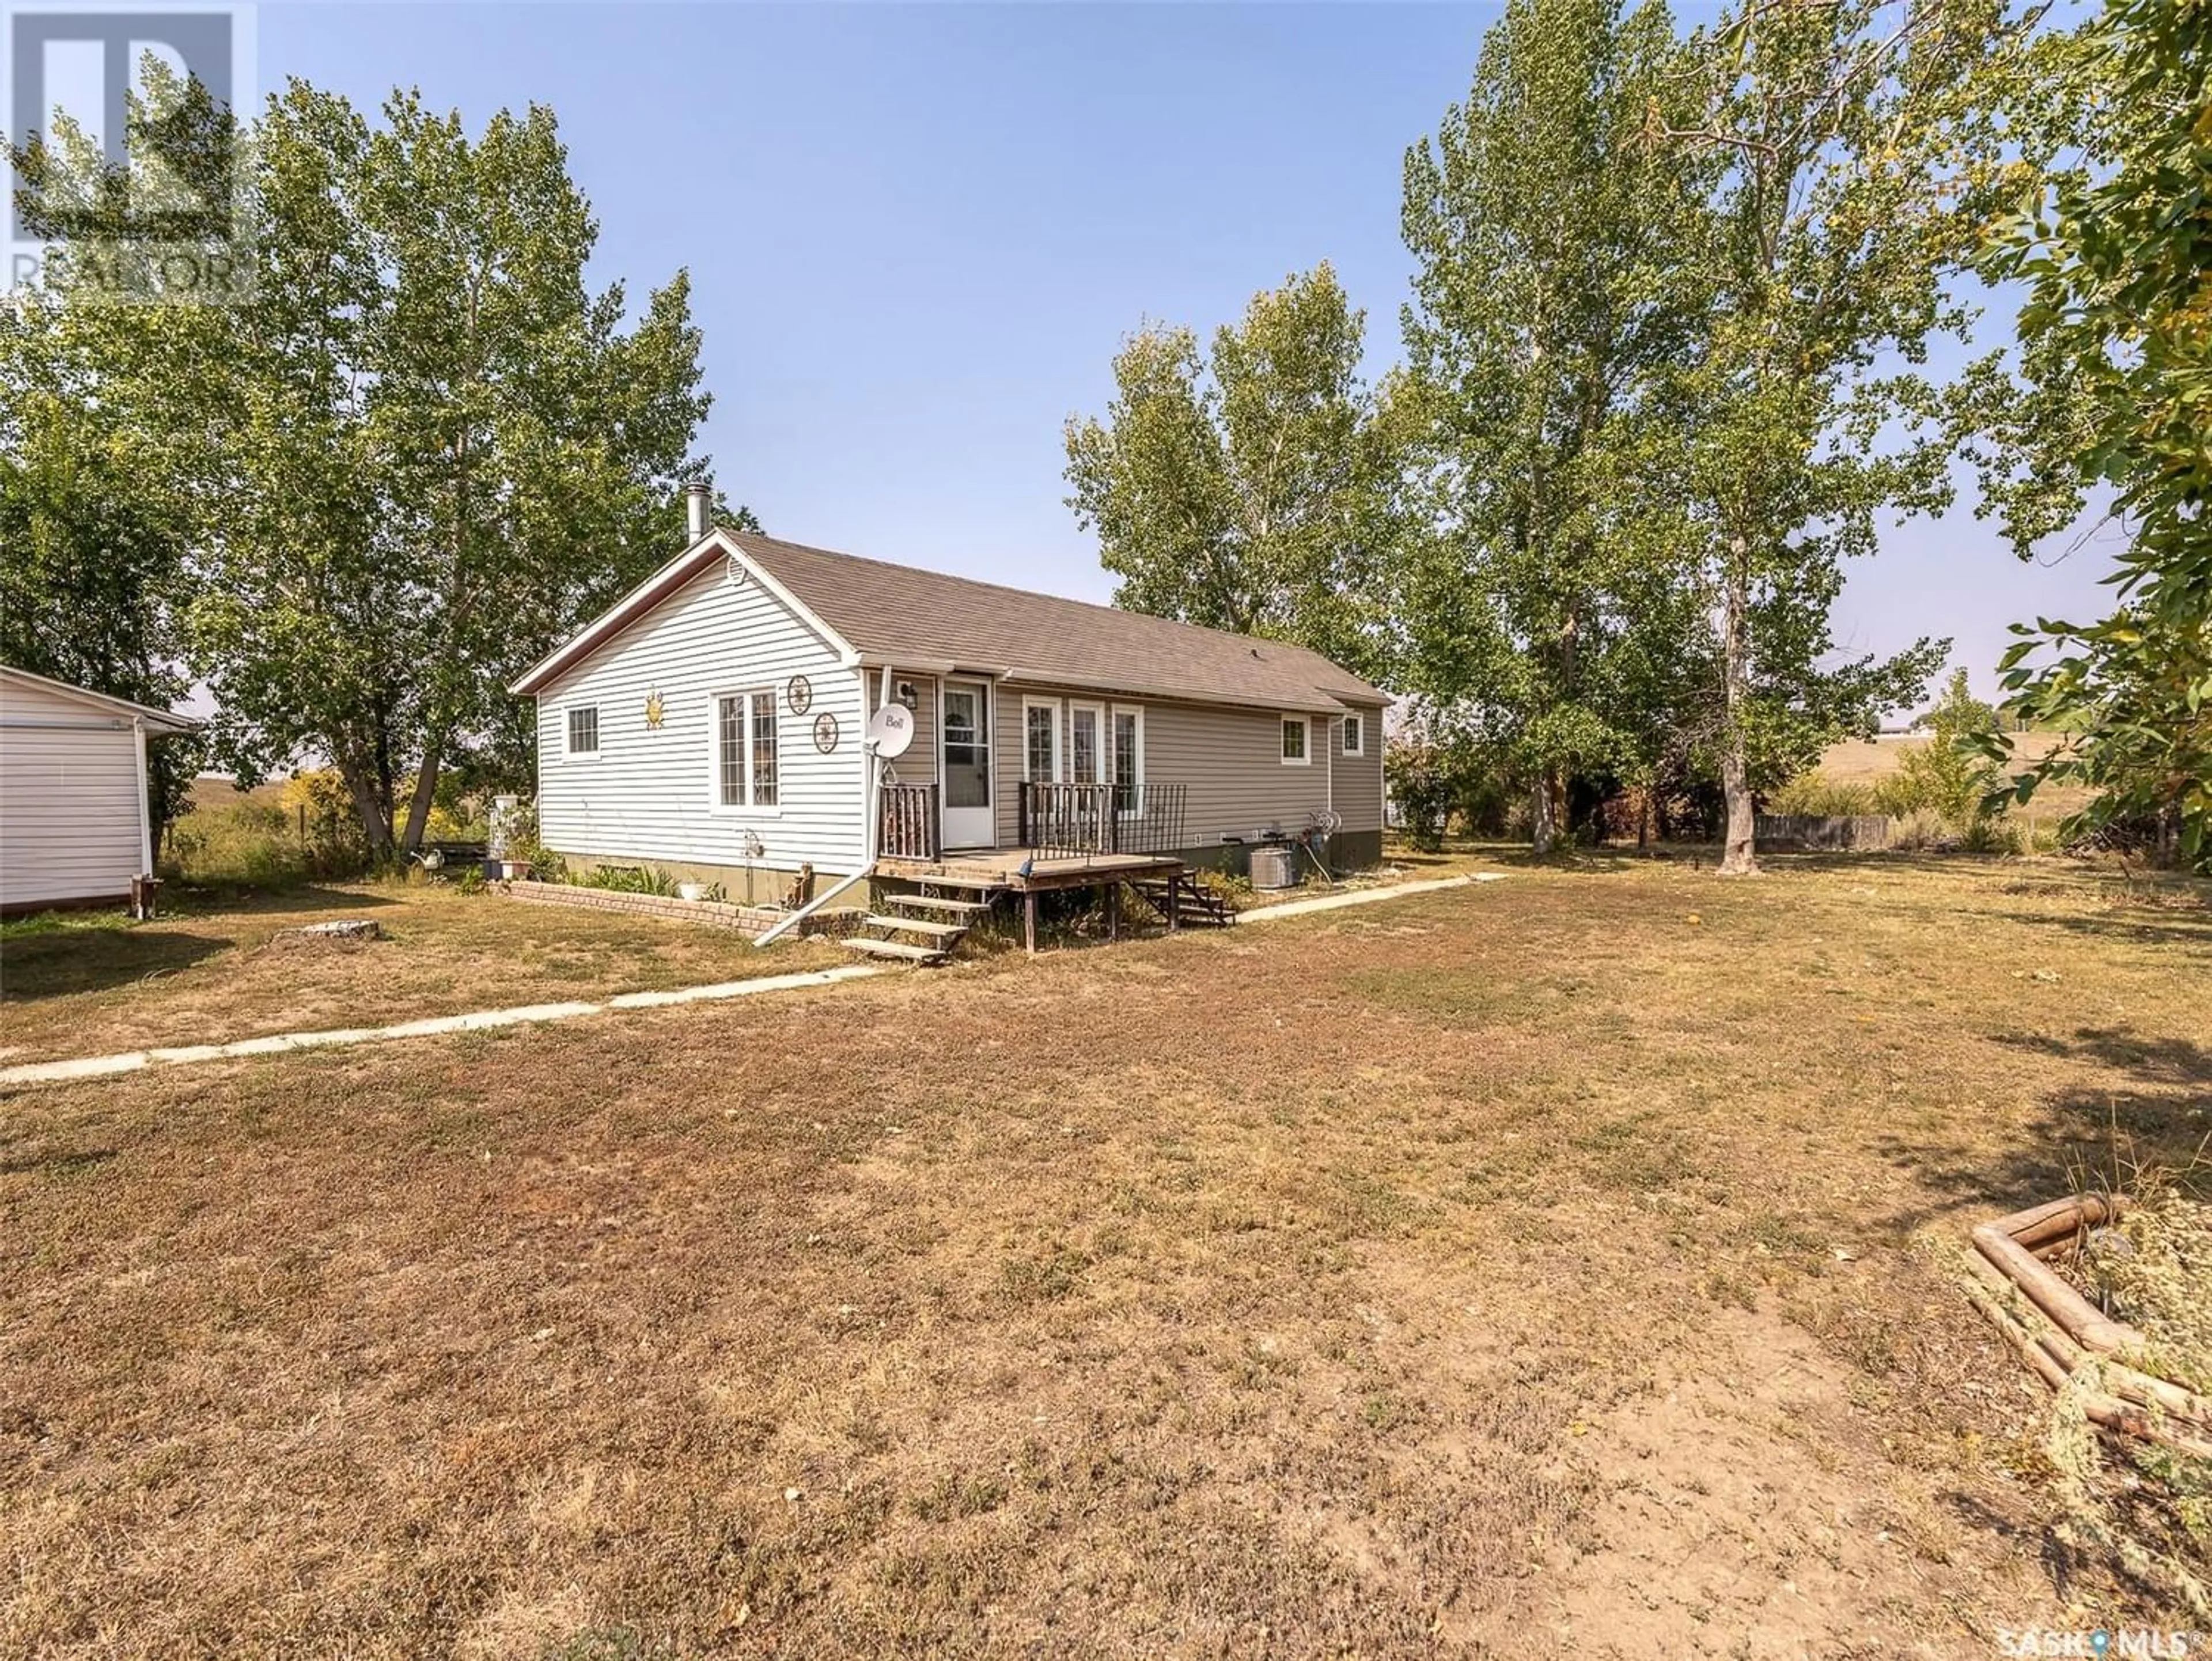 Home with unknown exterior material for Jacobson Acreage, Moose Jaw Rm No. 161 Saskatchewan S6H7A8